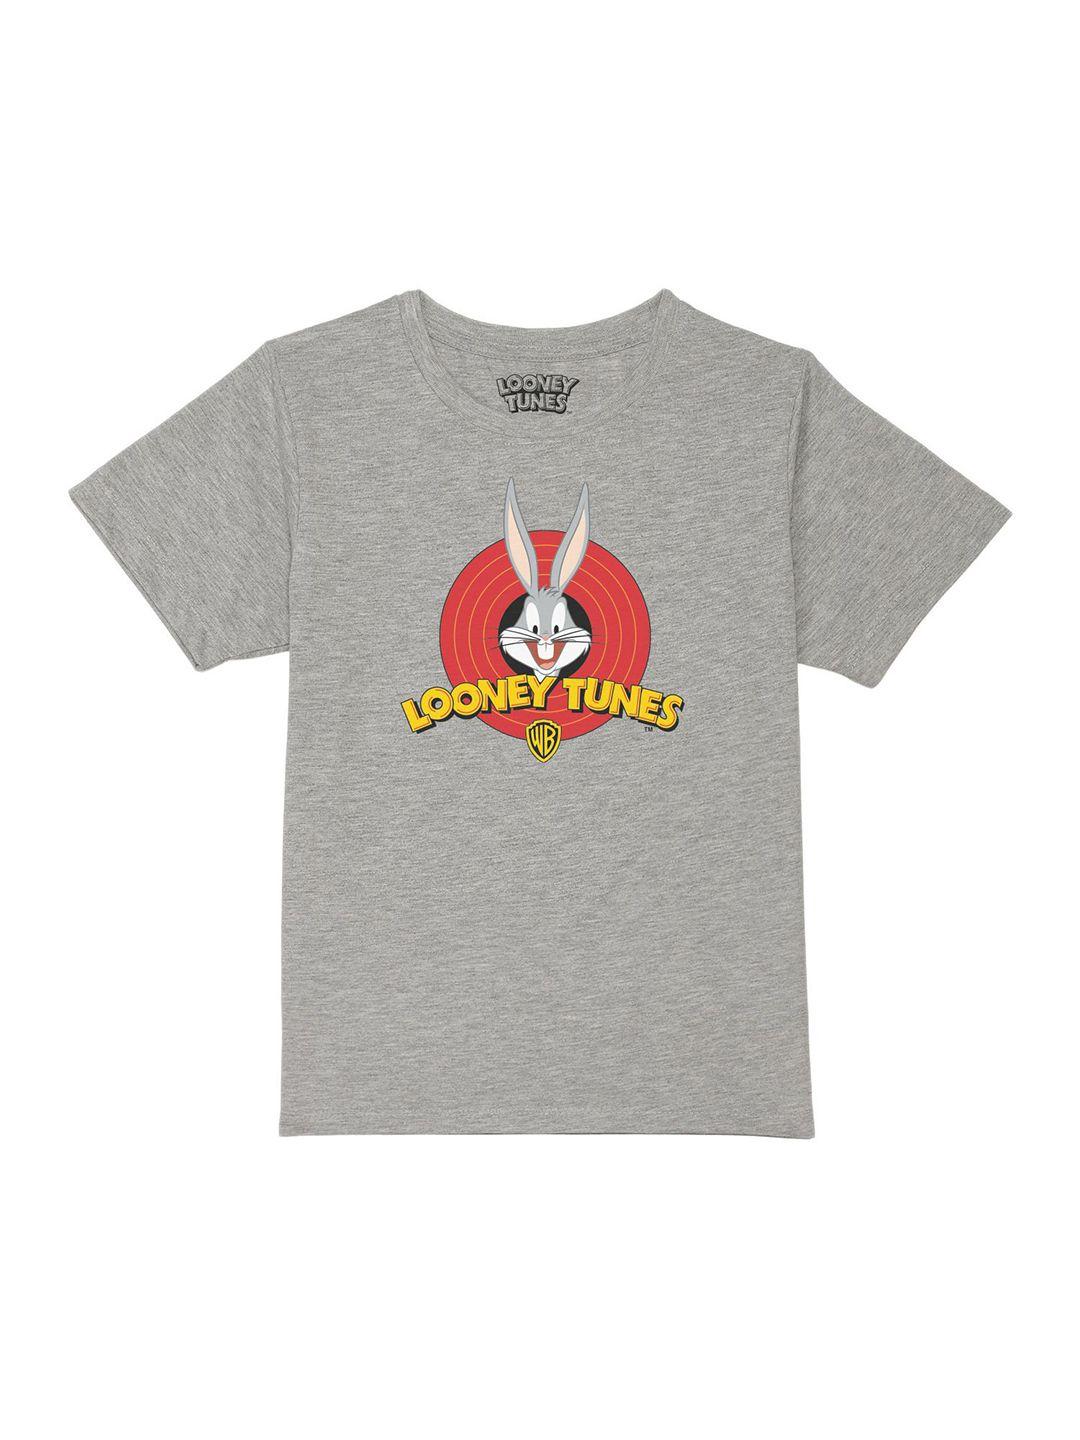 looney tunes by wear your mind boys grey & red printed t-shirt